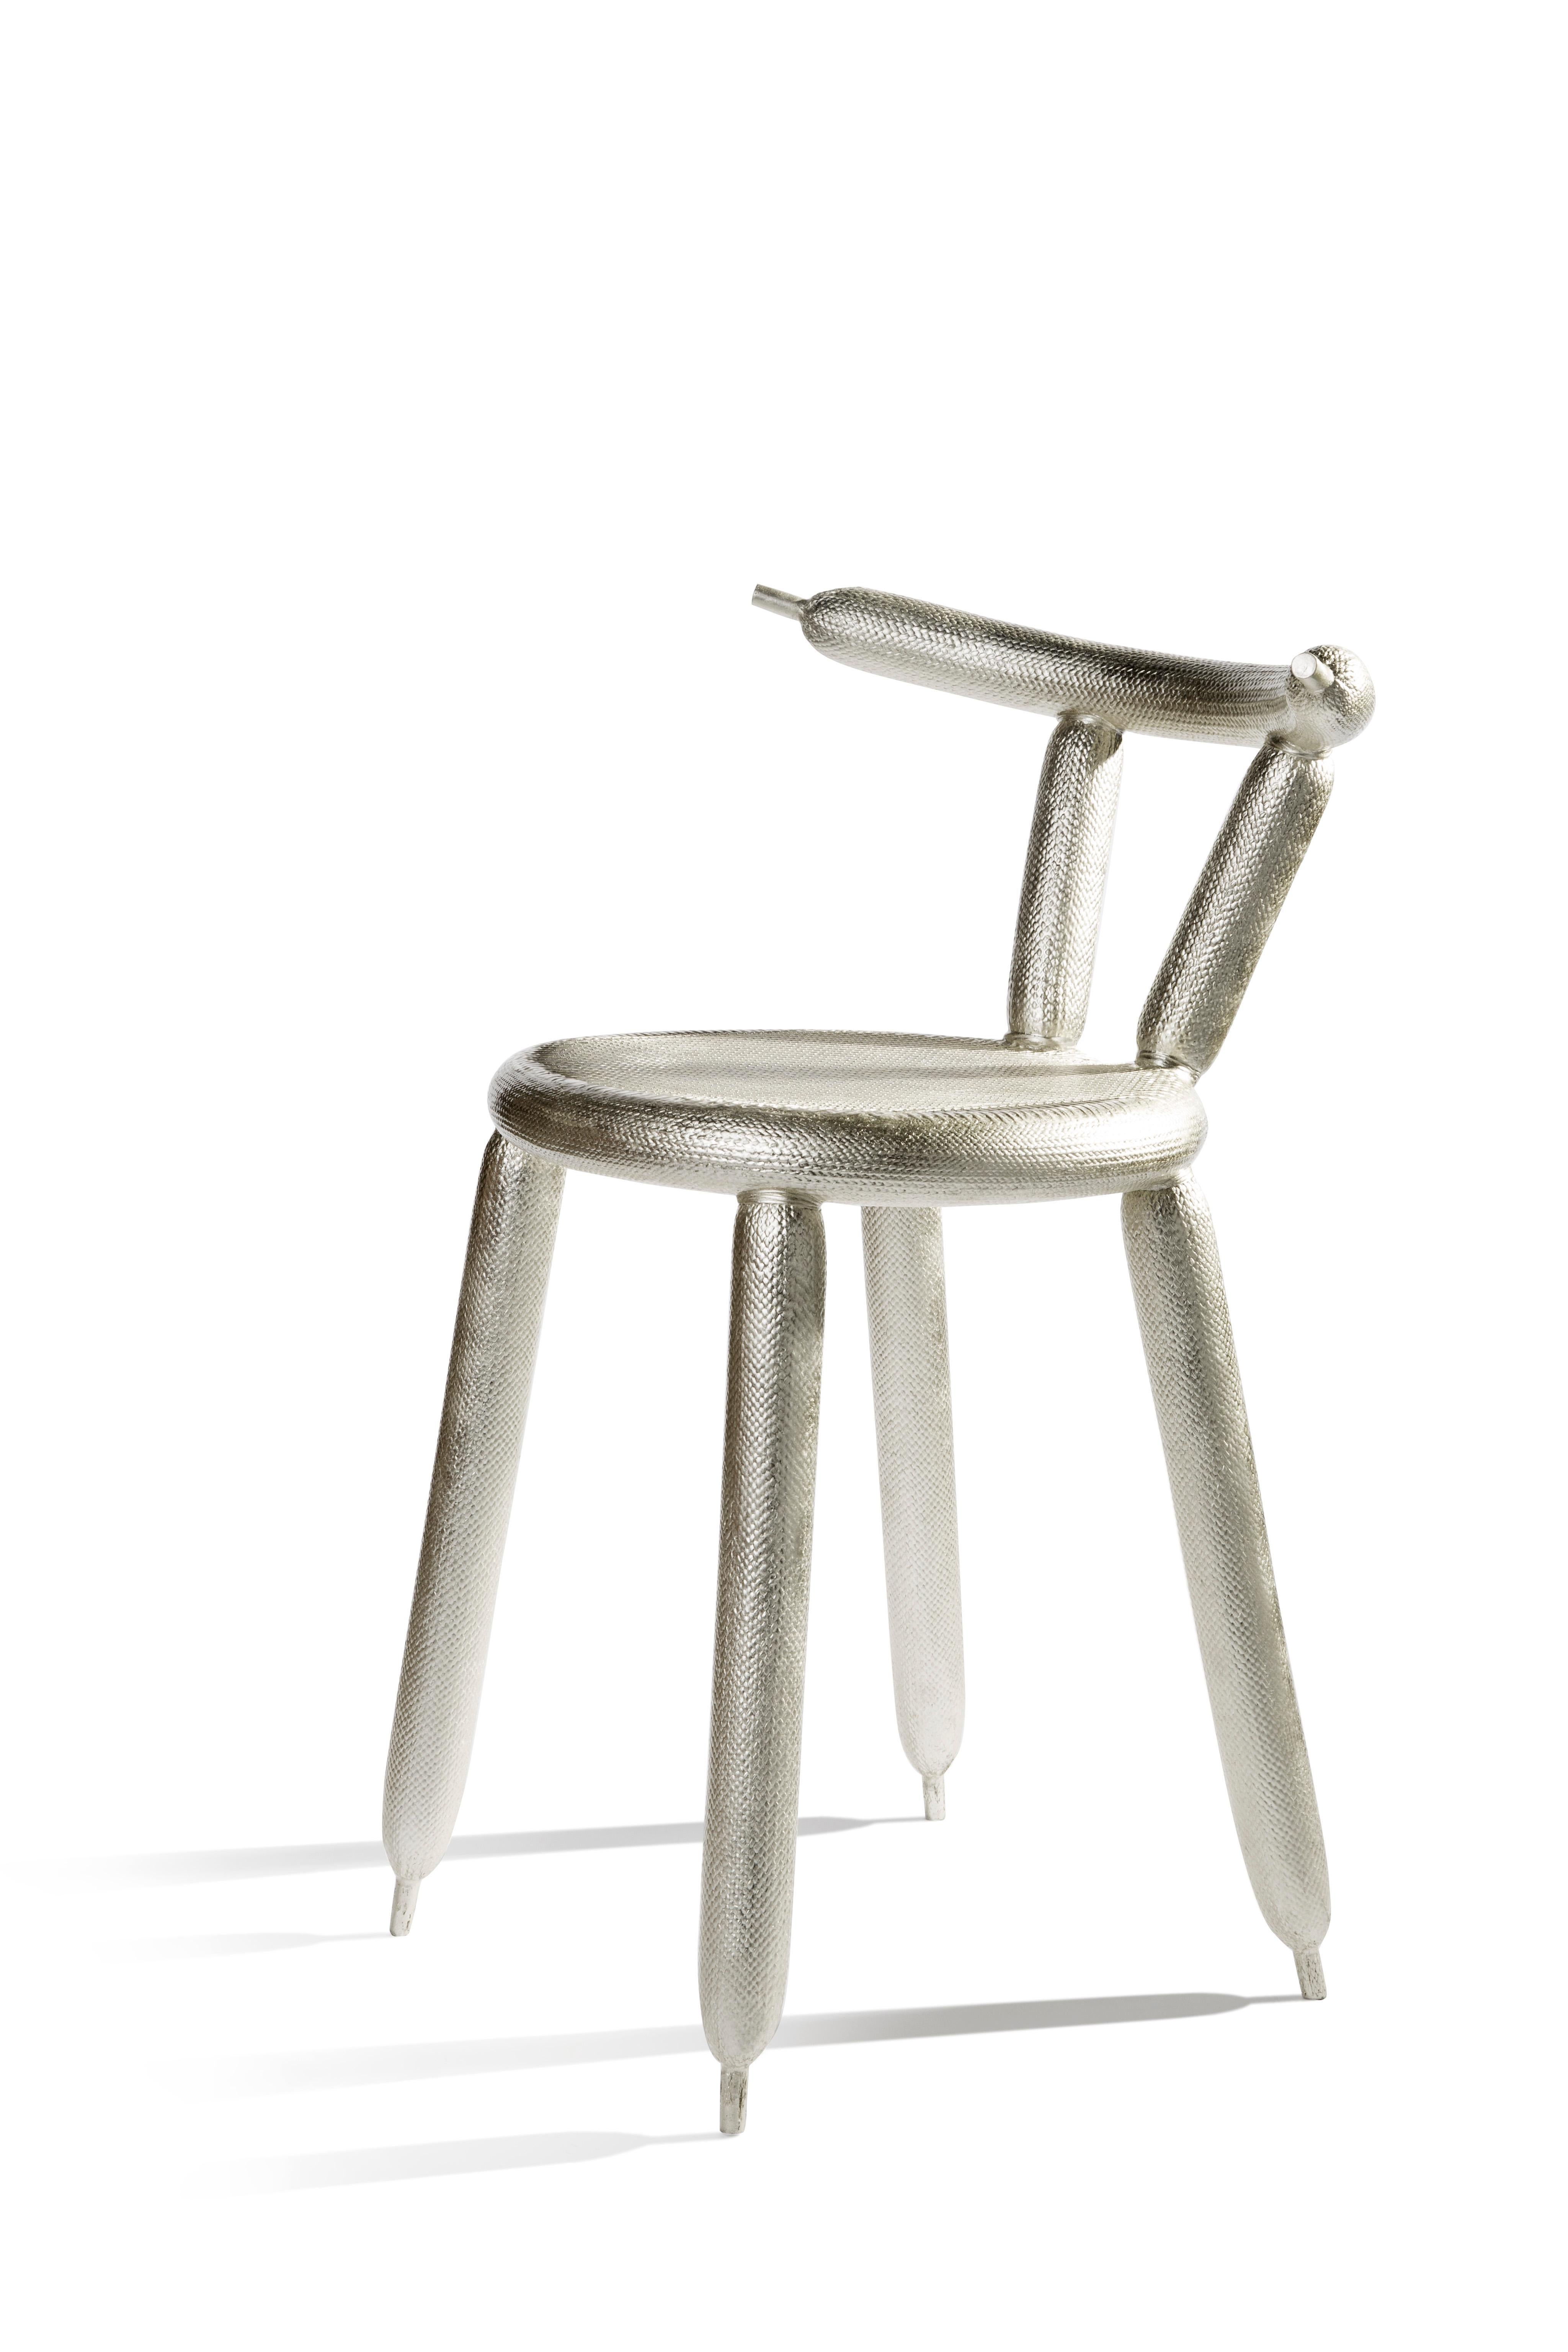 Dutch Carbon Balloon Chair White Gold, by Marcel Wanders, 2013, Limited Edition #2/5 For Sale